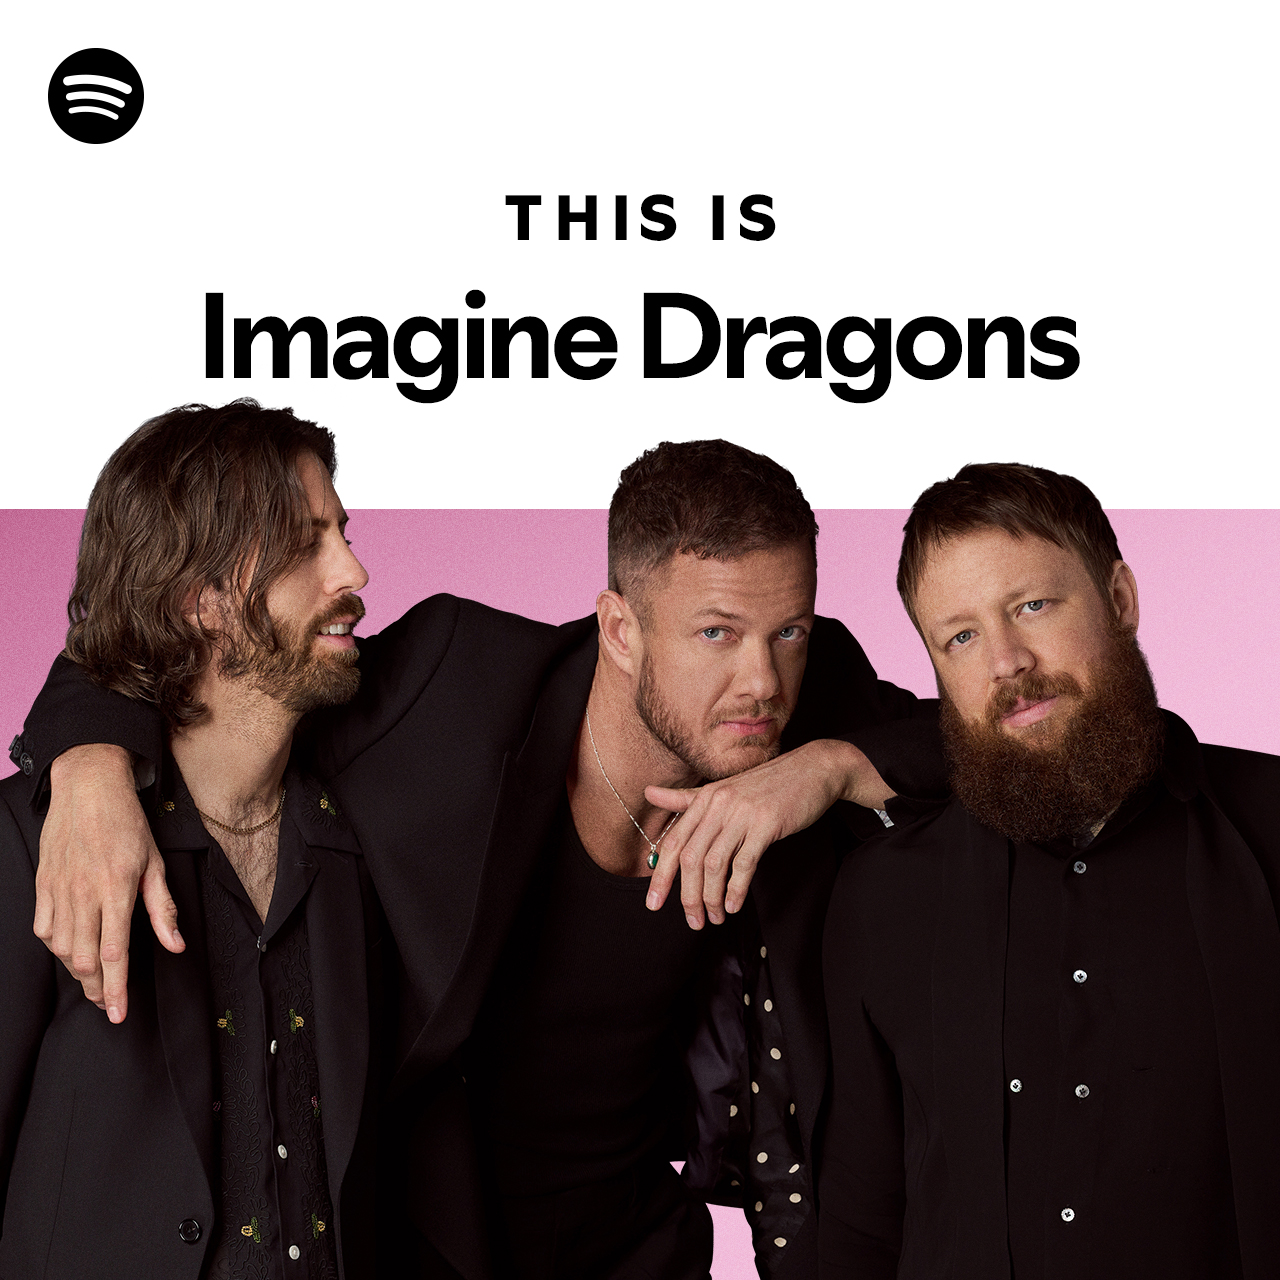 This Is Imagine Dragons - playlist by Spotify